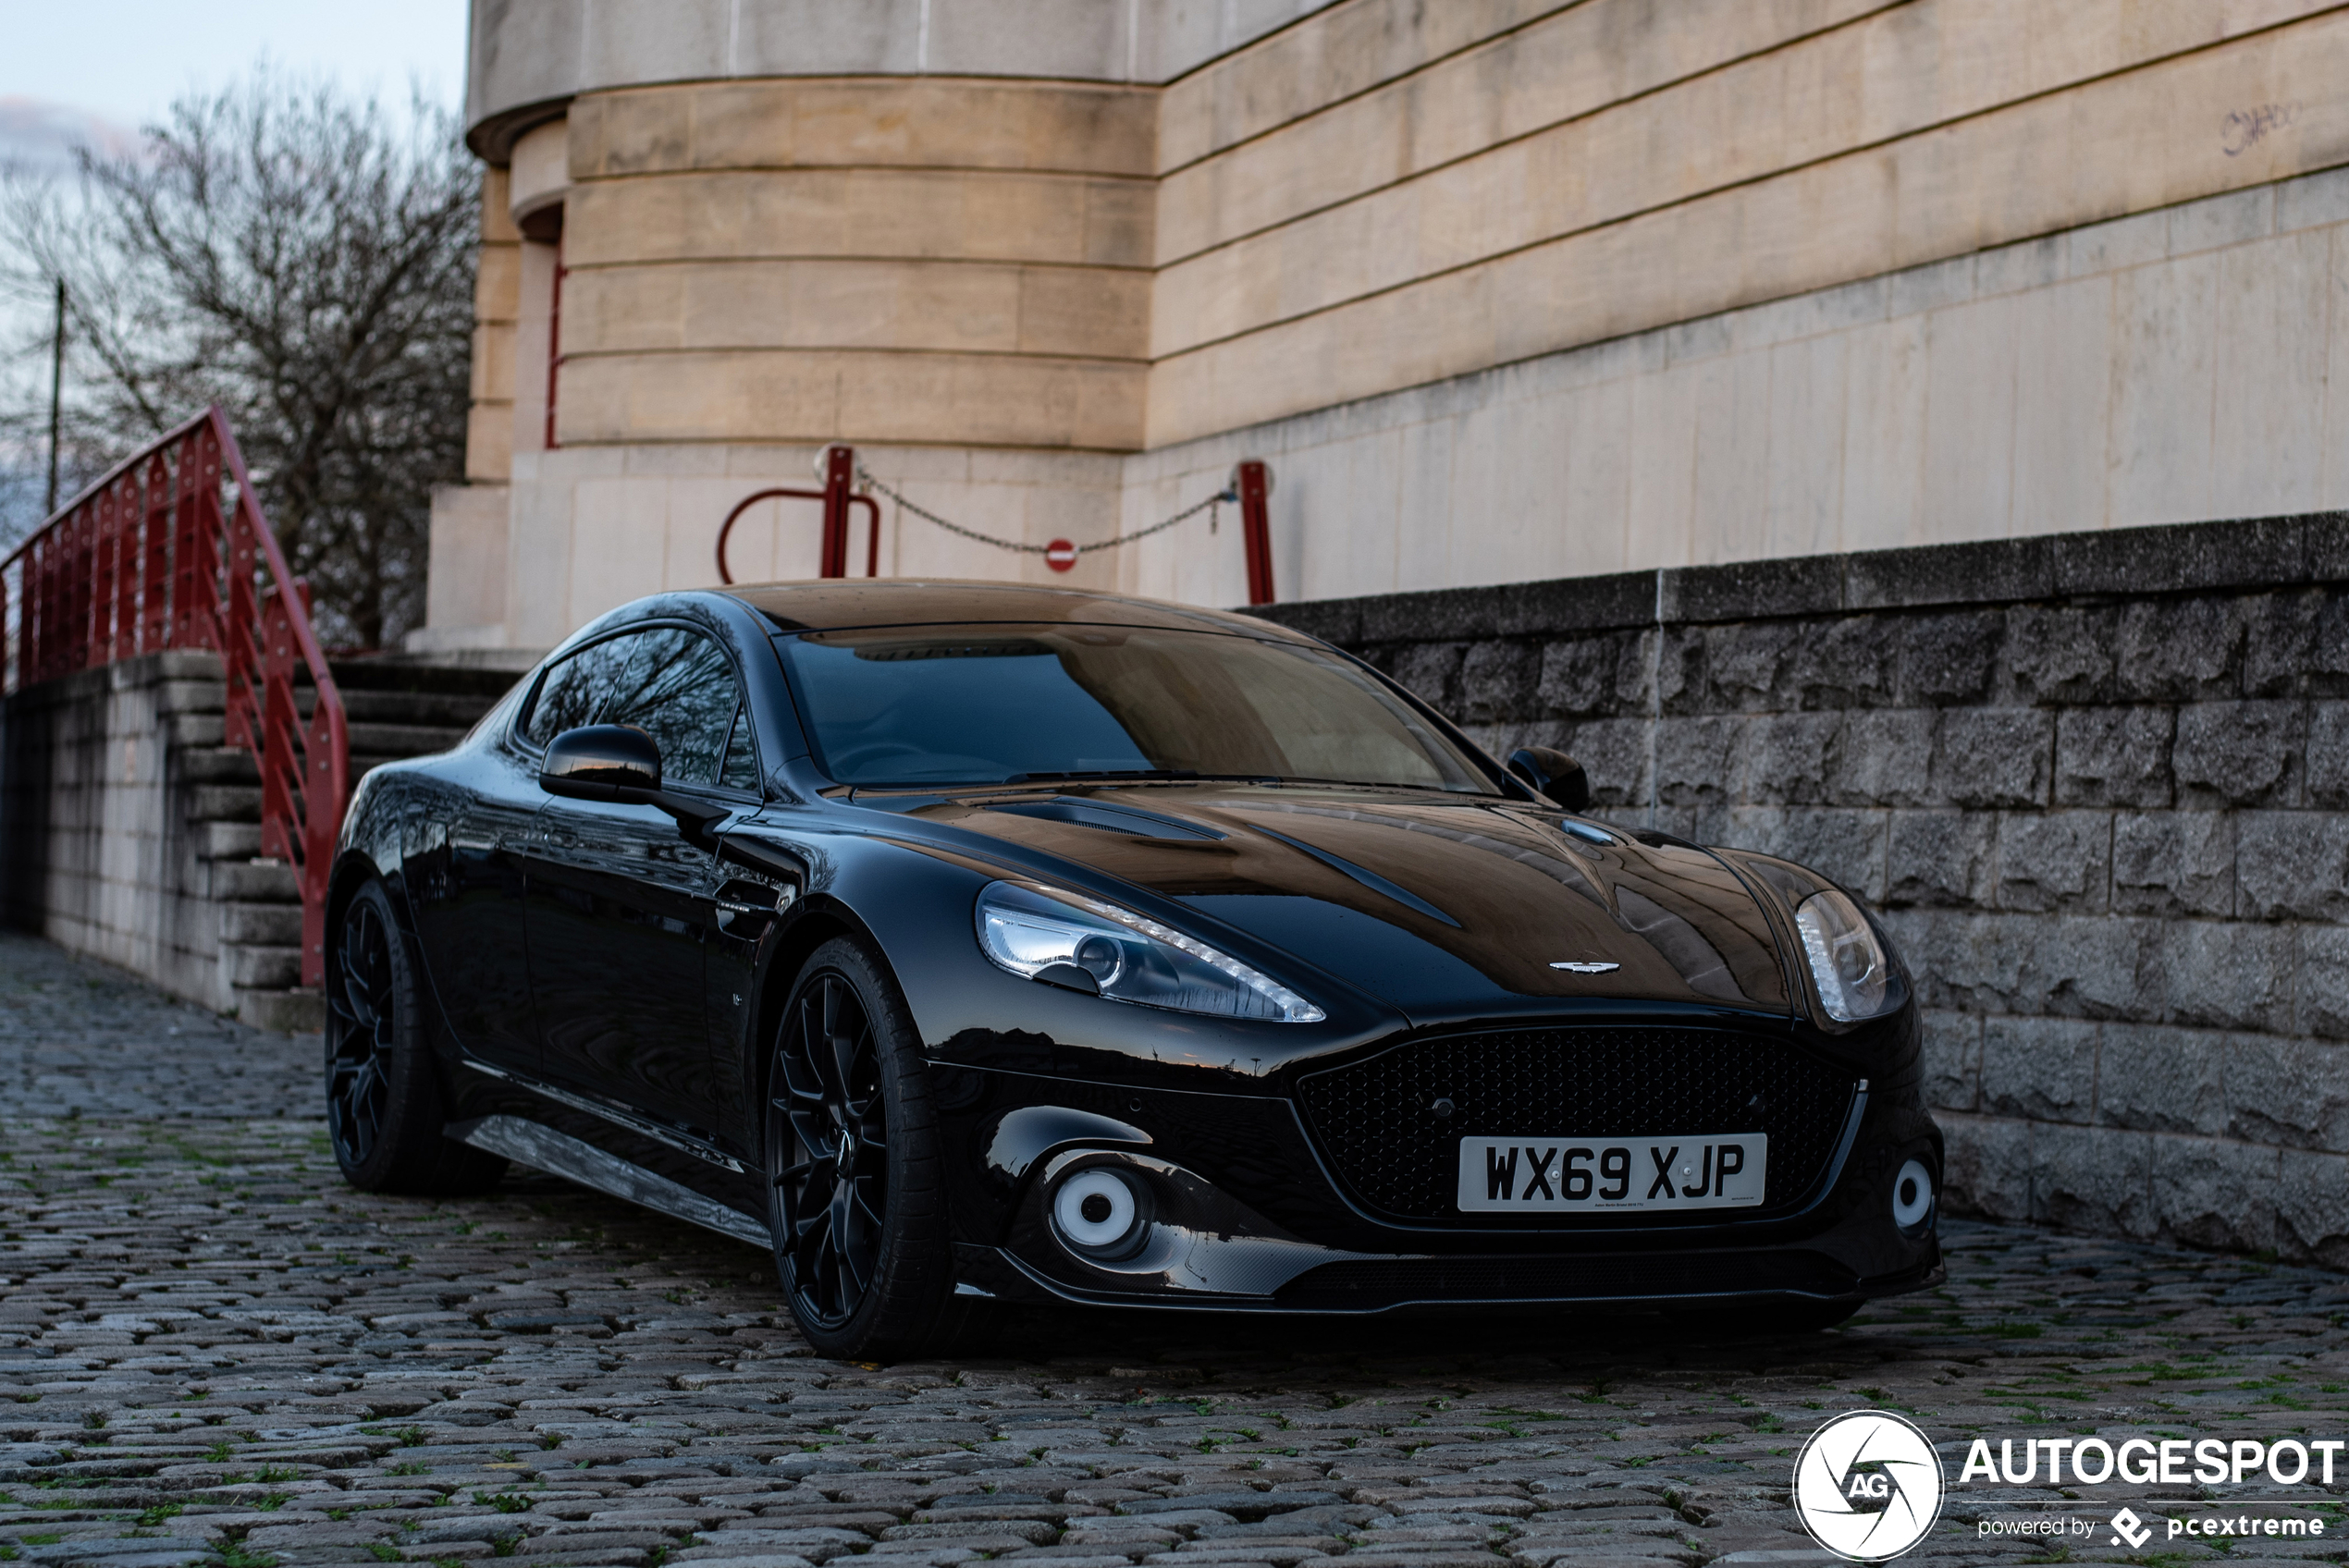 Blacked out: Aston Martin Rapide S AMR